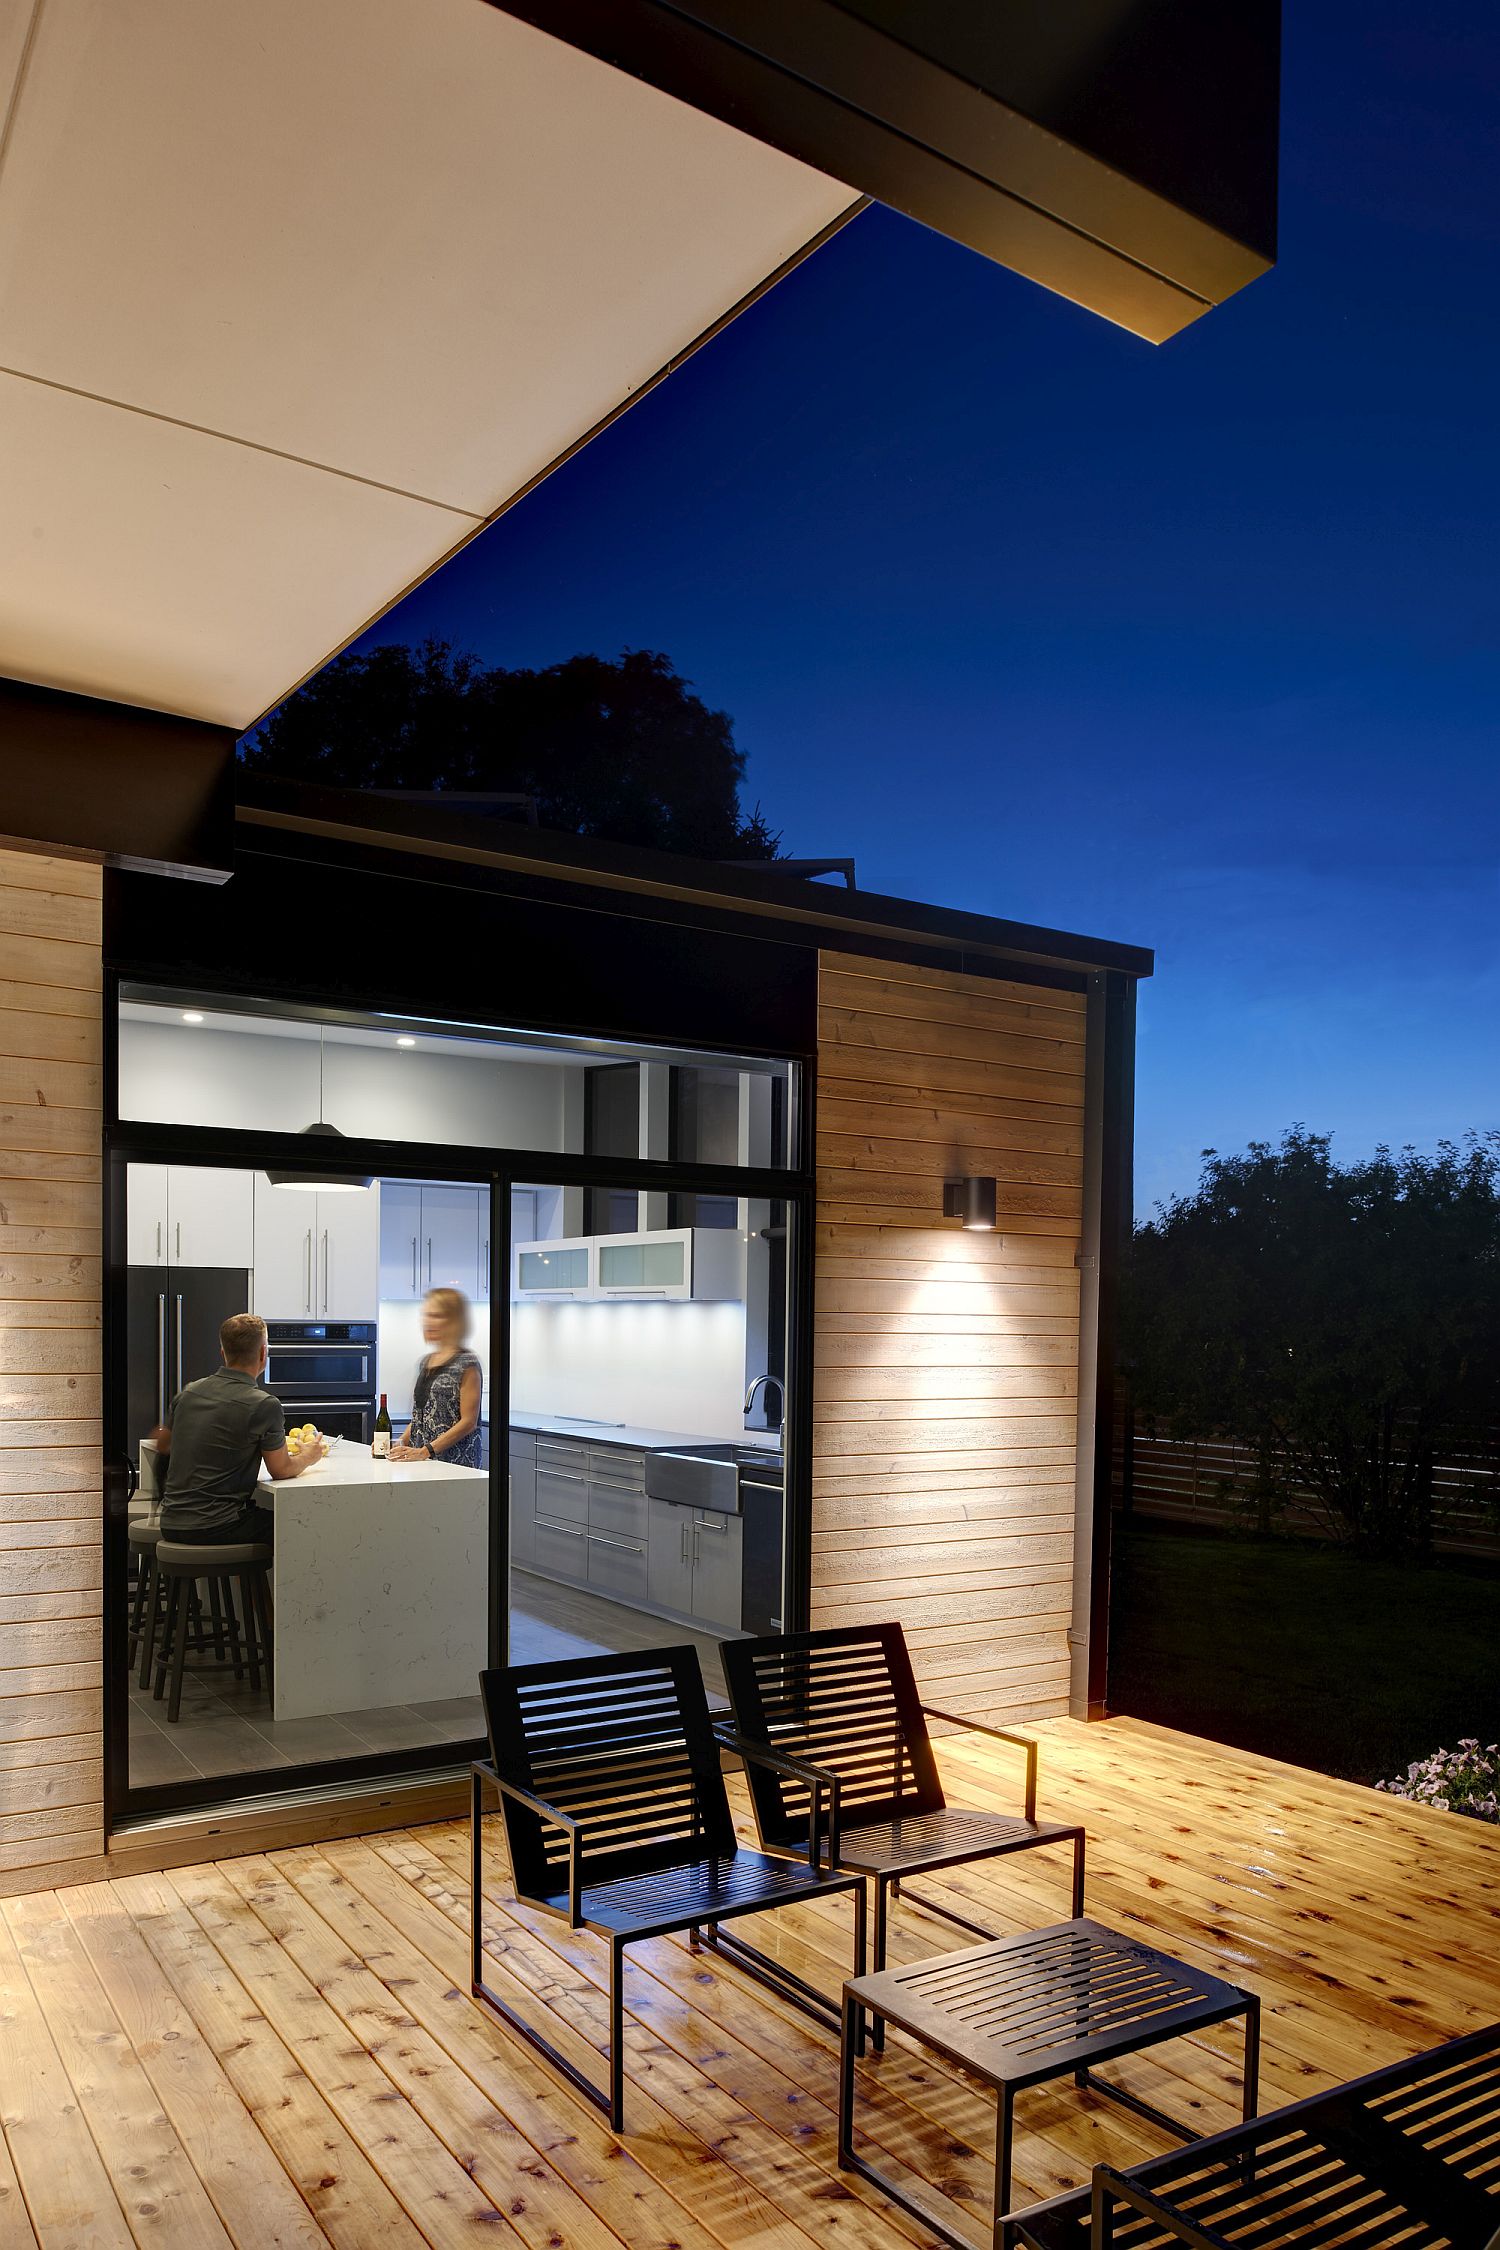 Wooden-deck-is-connected-with-the-kitchen-inside